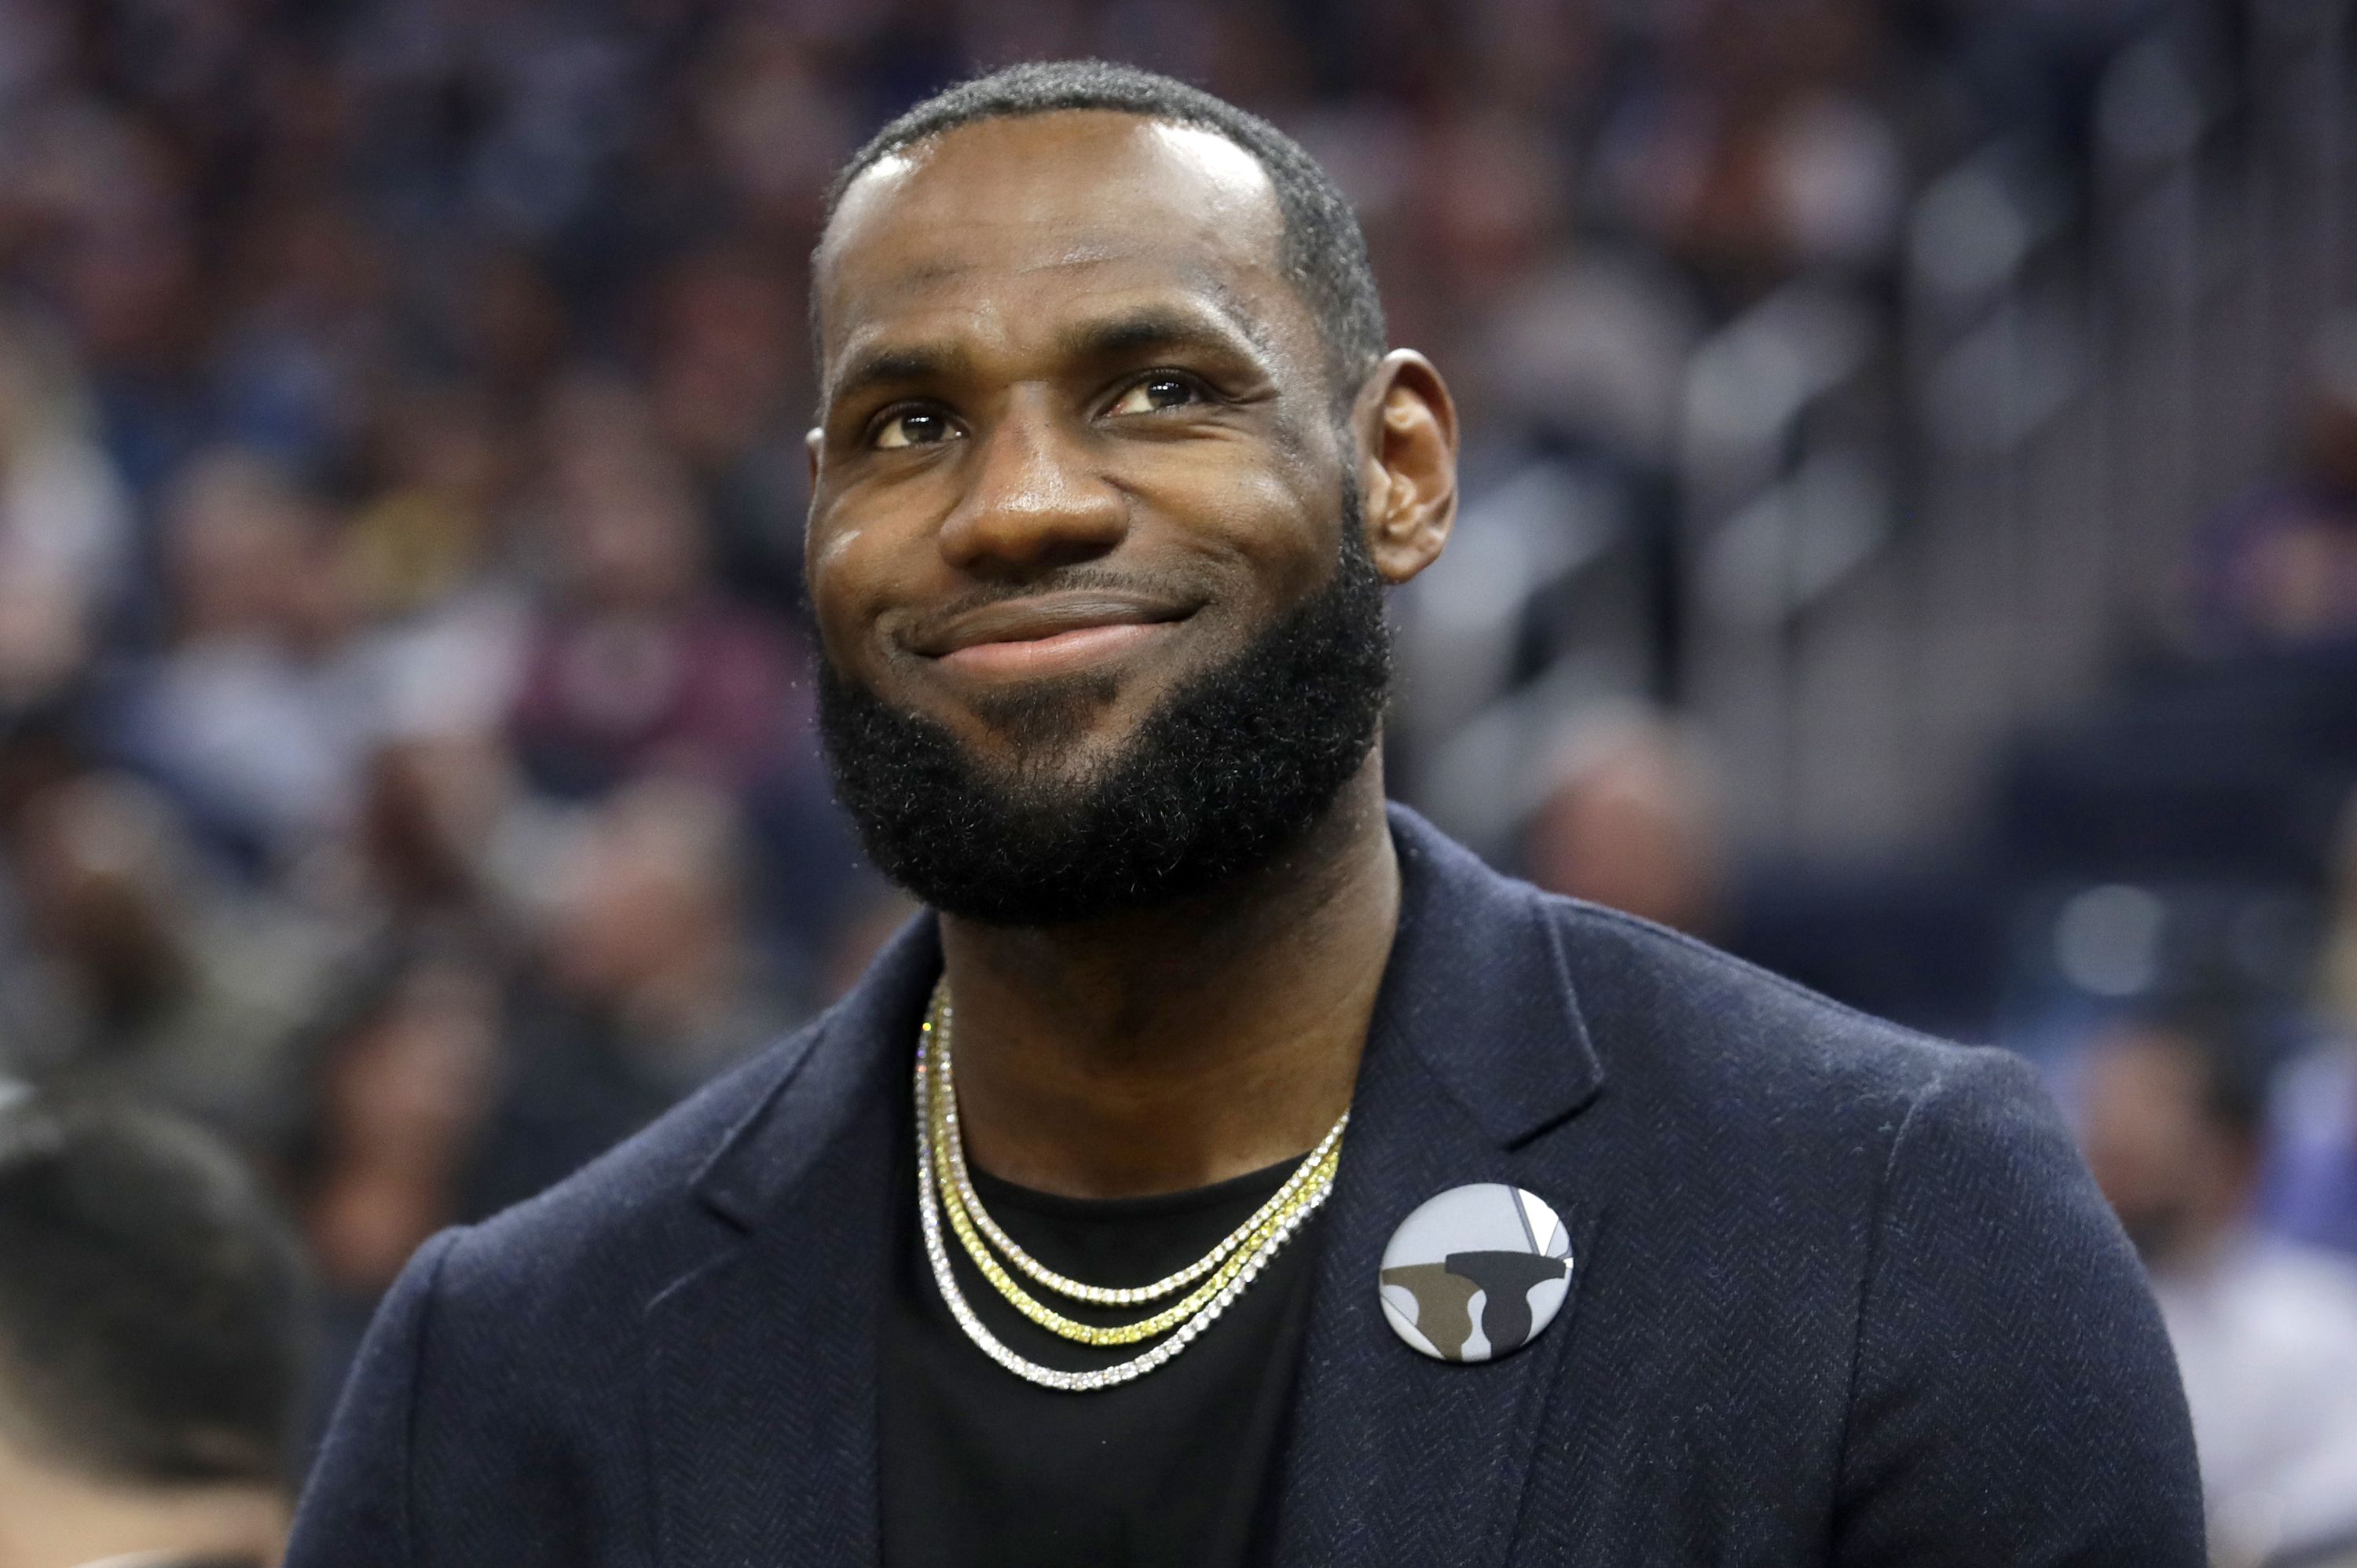 LeBron James planning to give up No. 23 out of respect for Michael